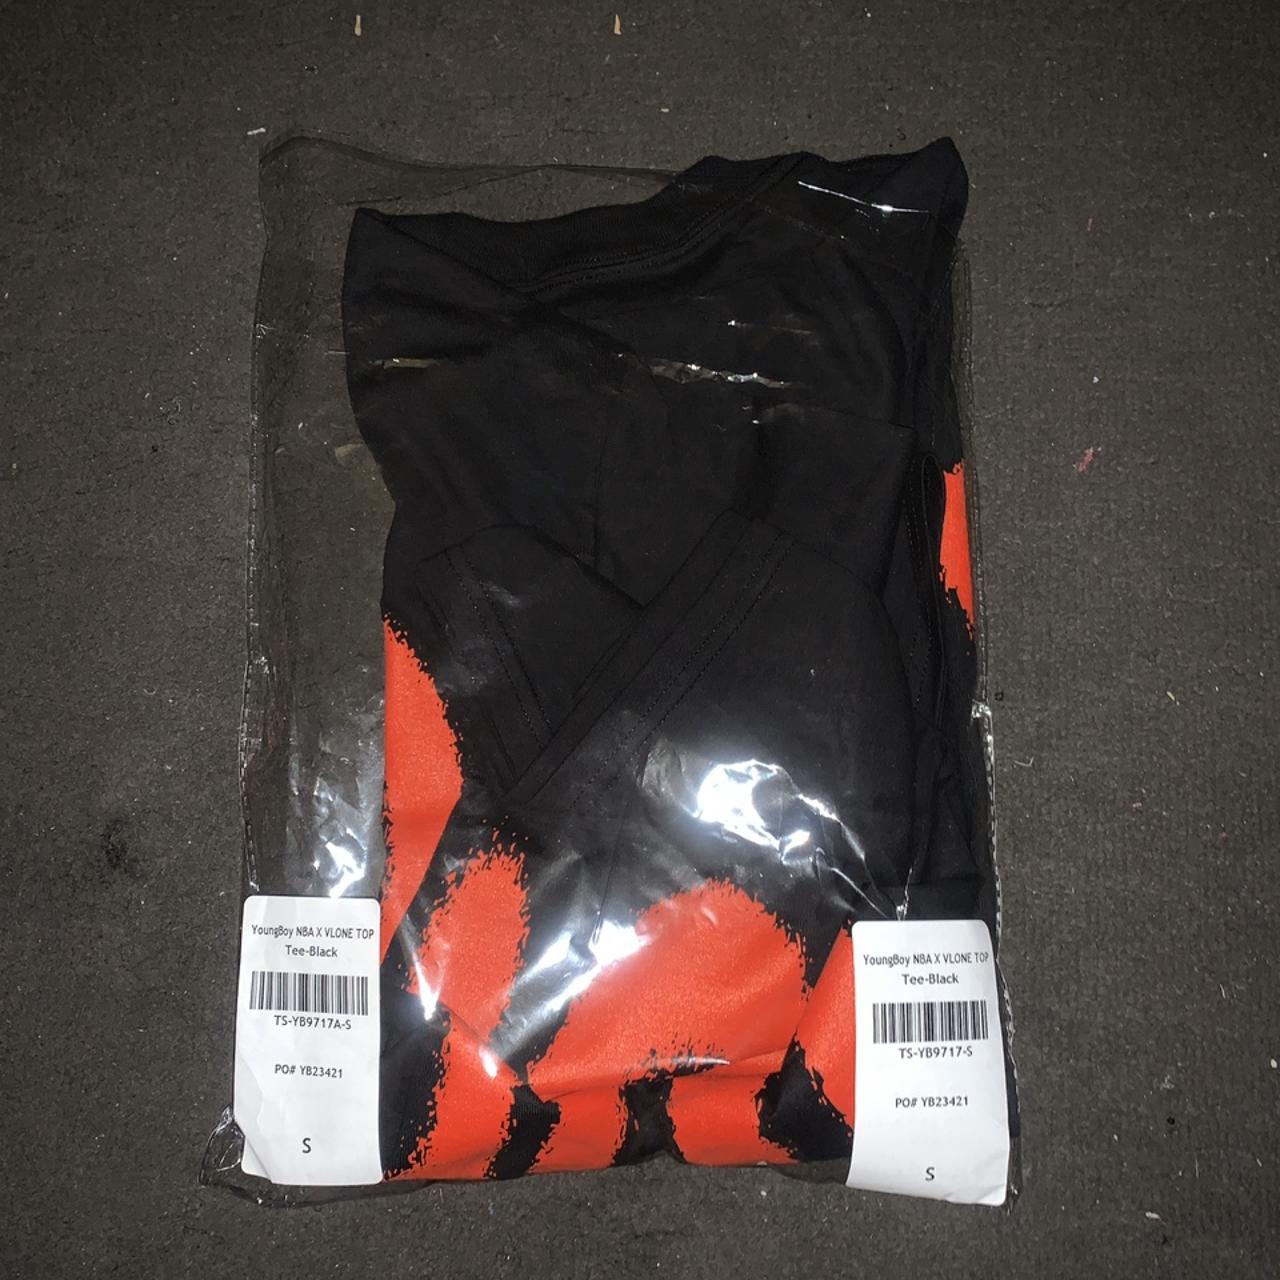 VLONE x Youngboy NBA Top Tee - Get Upto 20% OFF